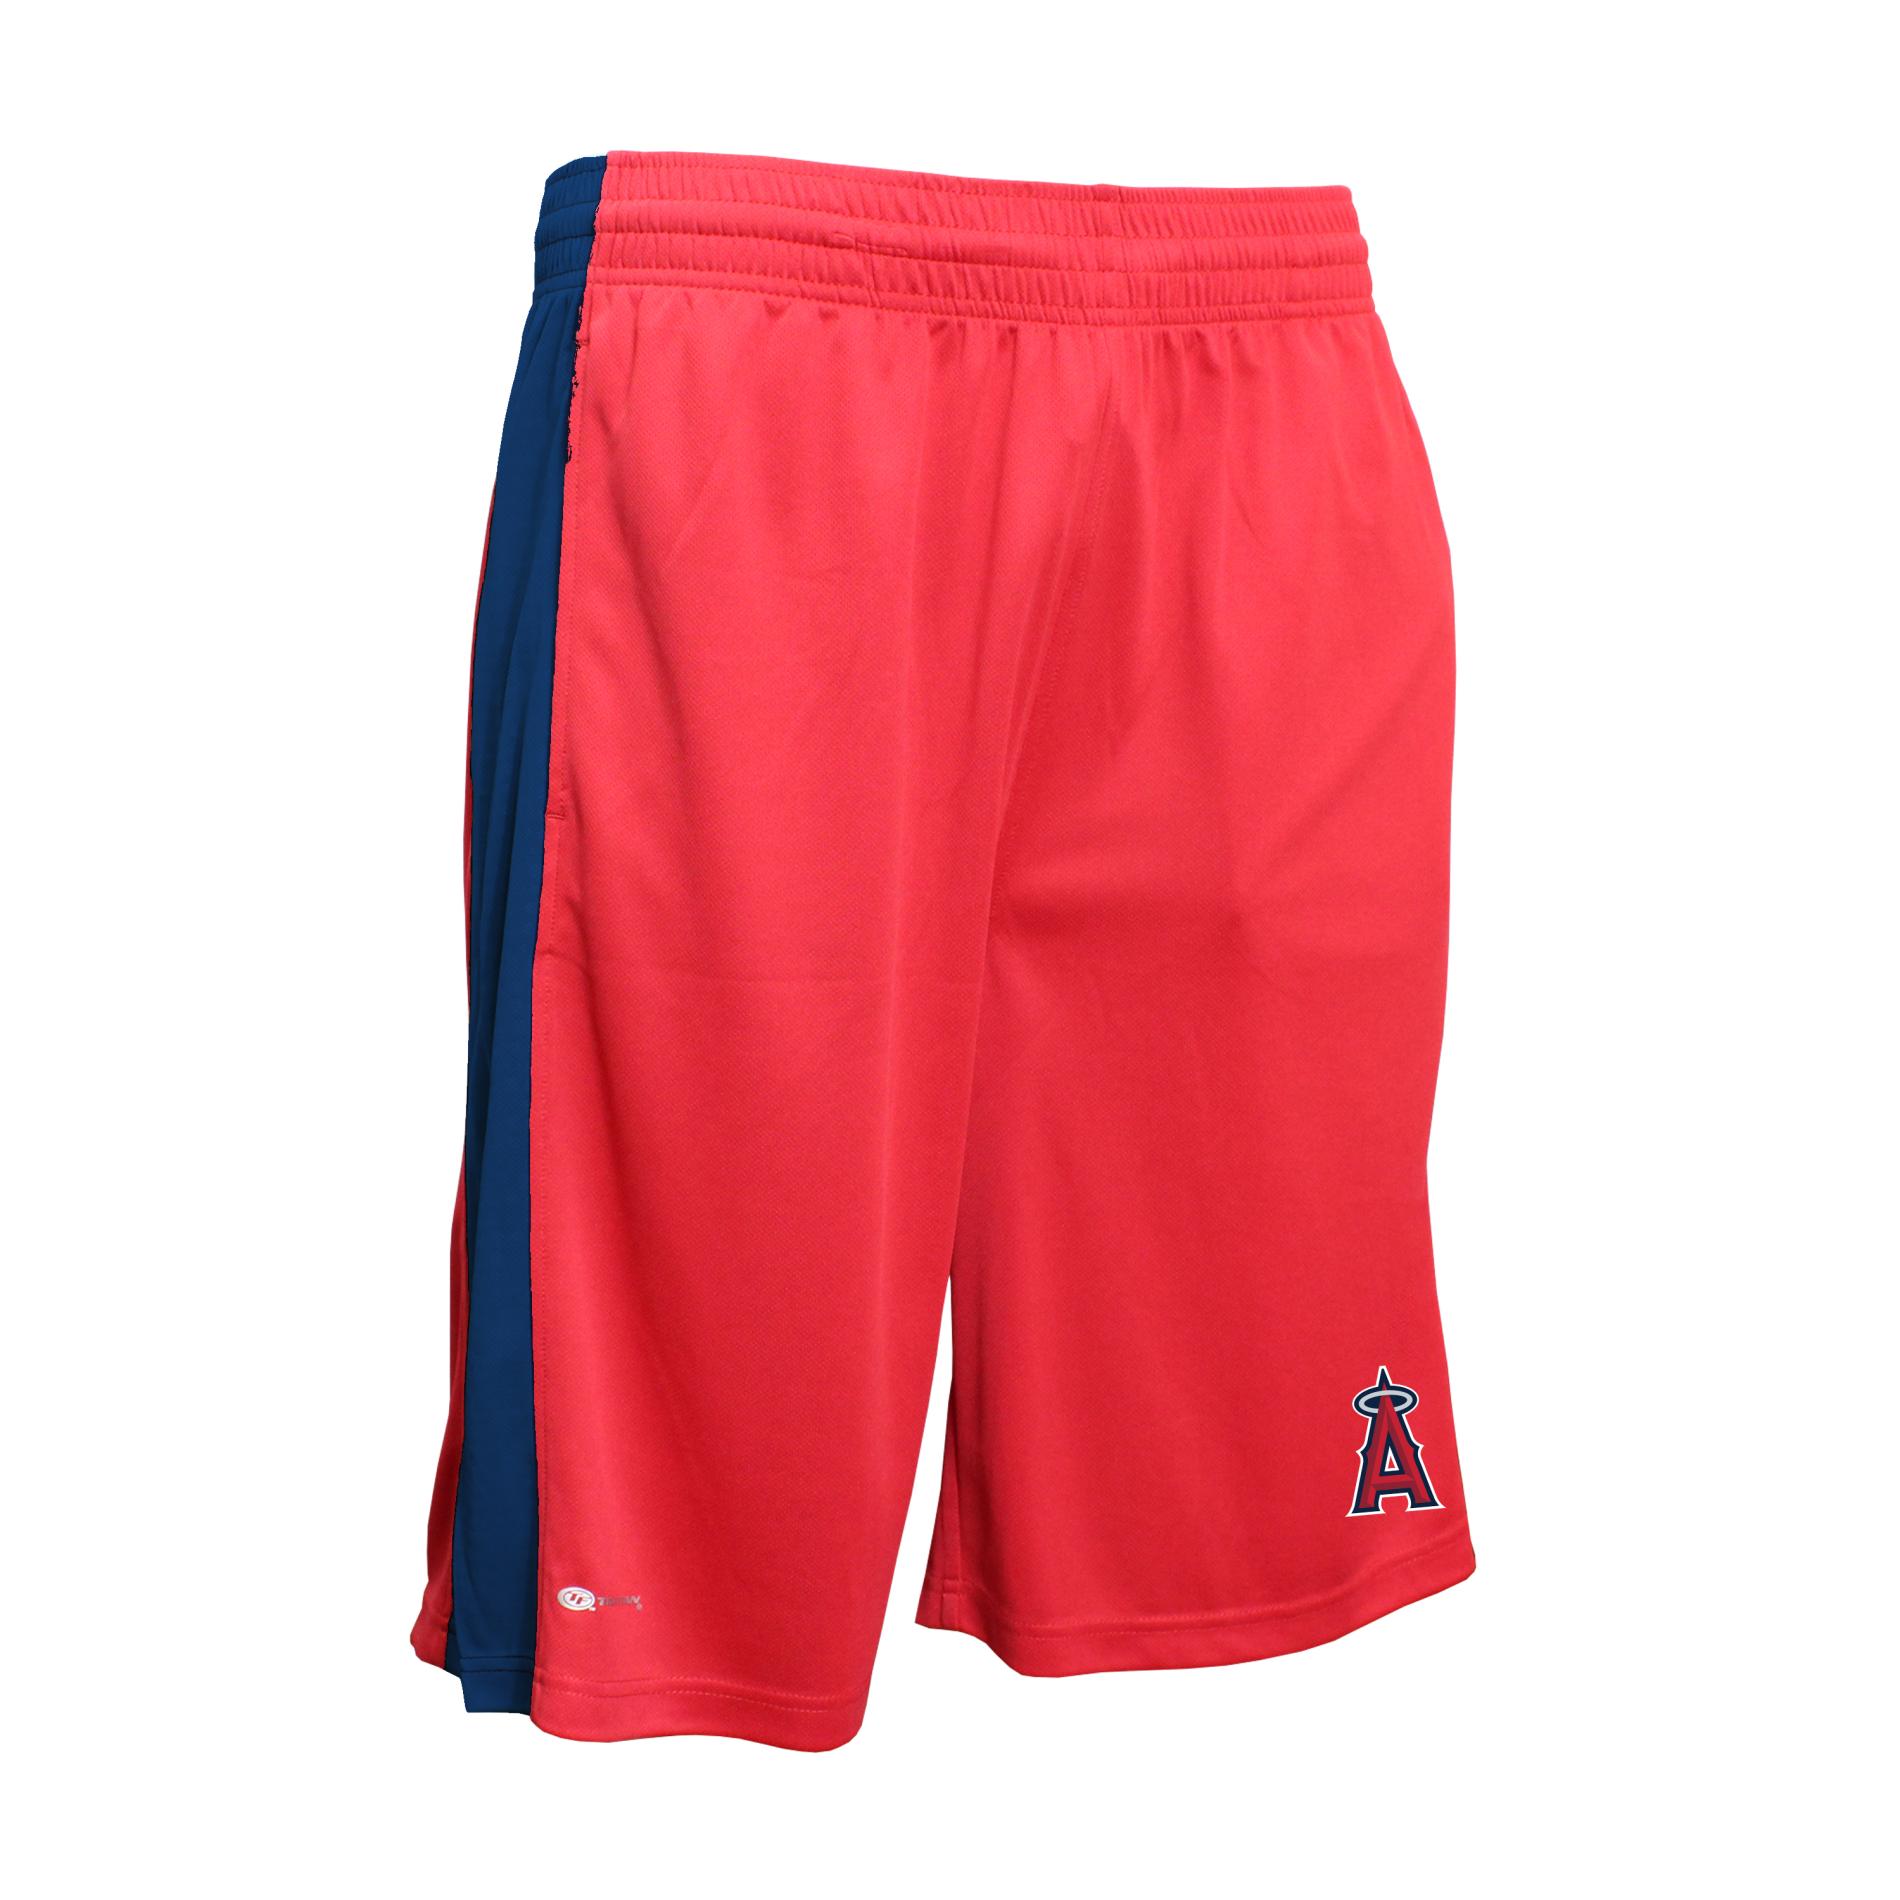 MLB Men's Athletic Shorts - Los Angeles Angels of Anaheim